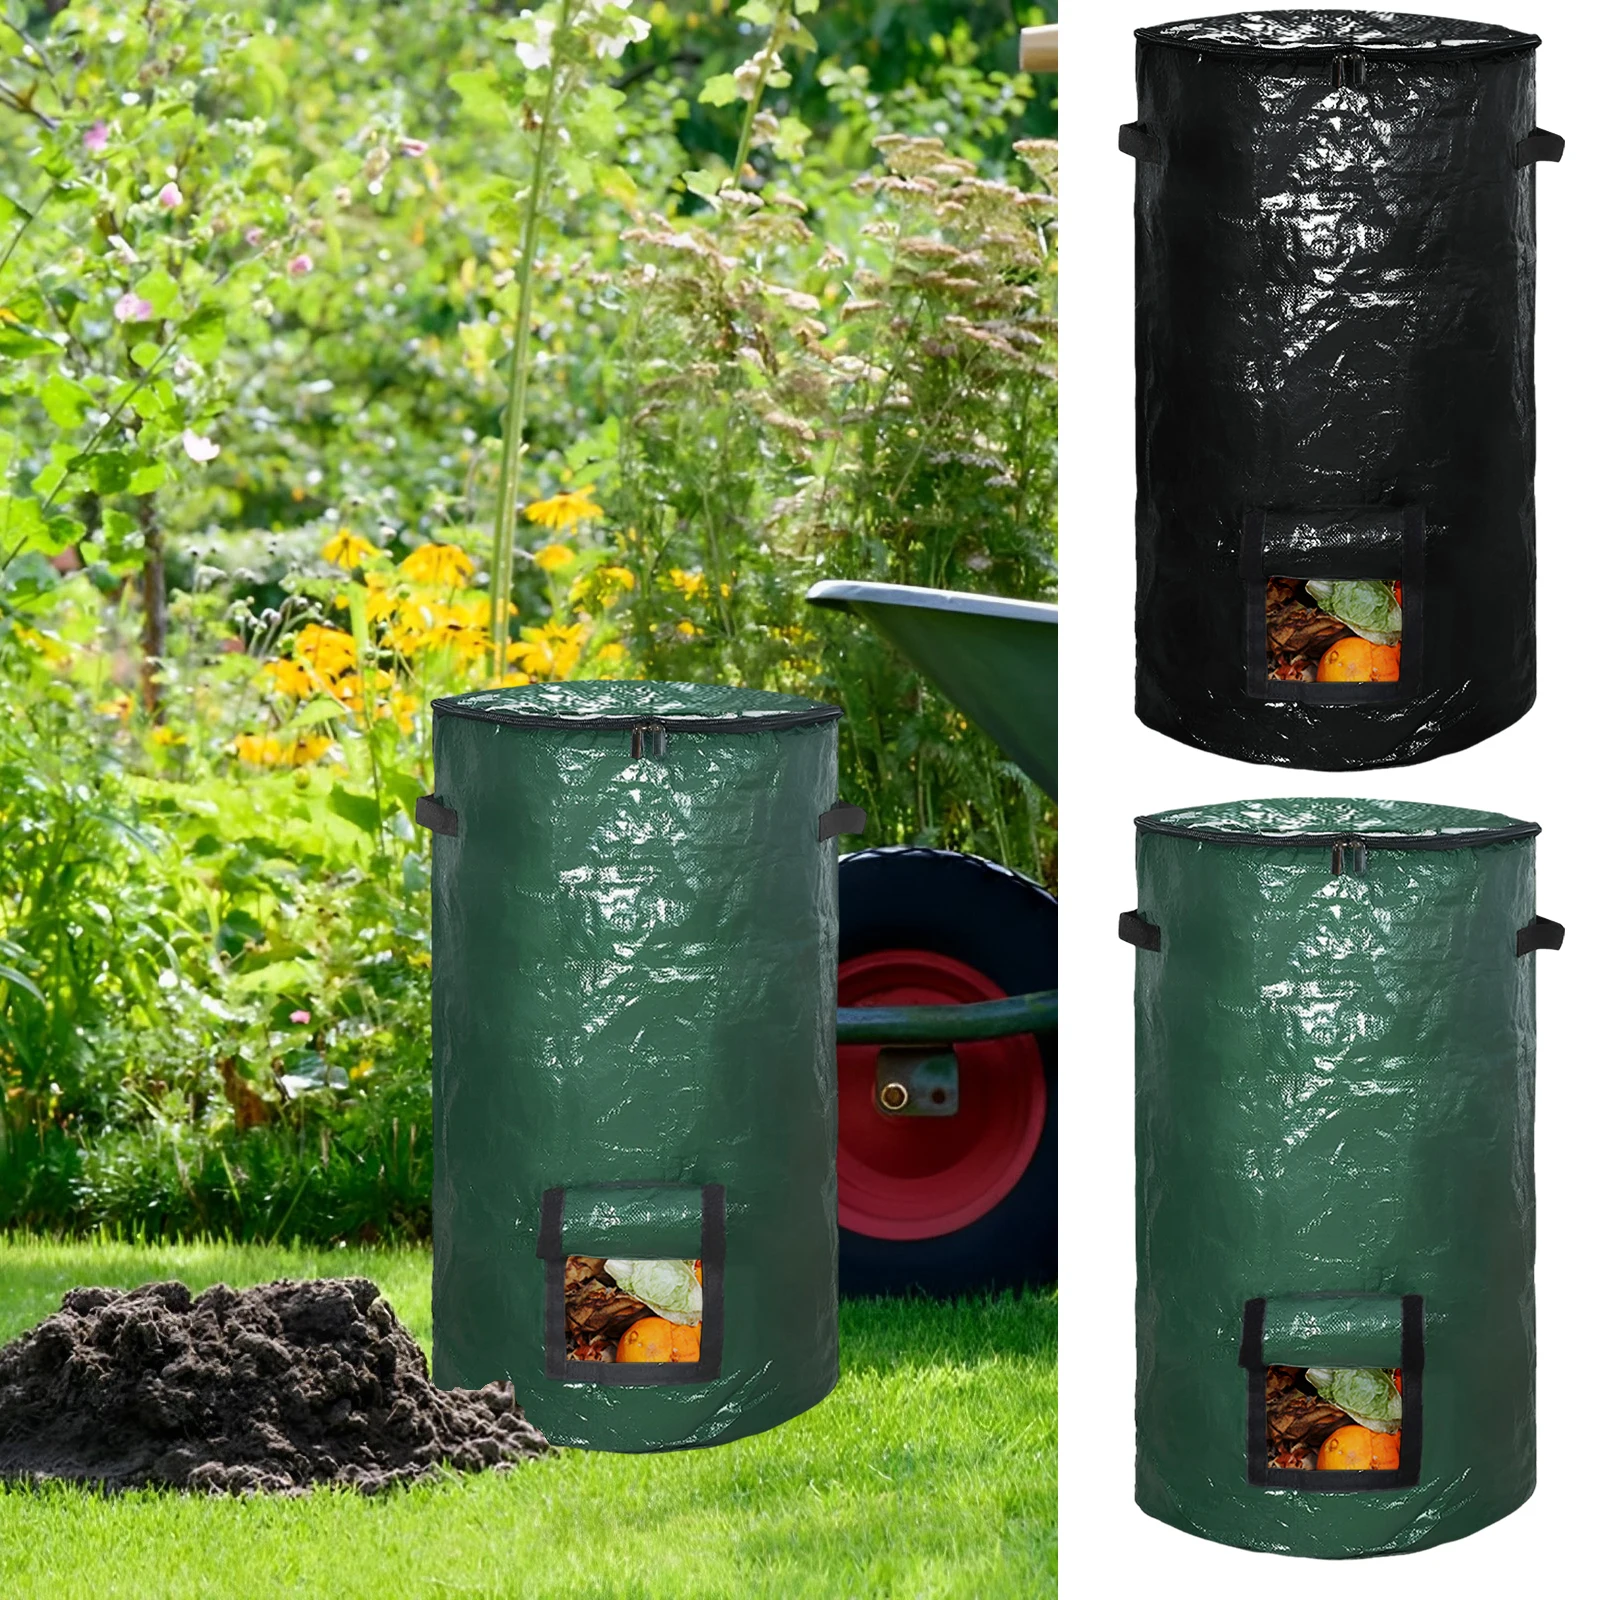 

Garden Compost Bin Bag 34 Gallon Reusable Yard Waste Bags Collapsible Lawn Bags Waterproof Yard Waste Container for Garden Lawn